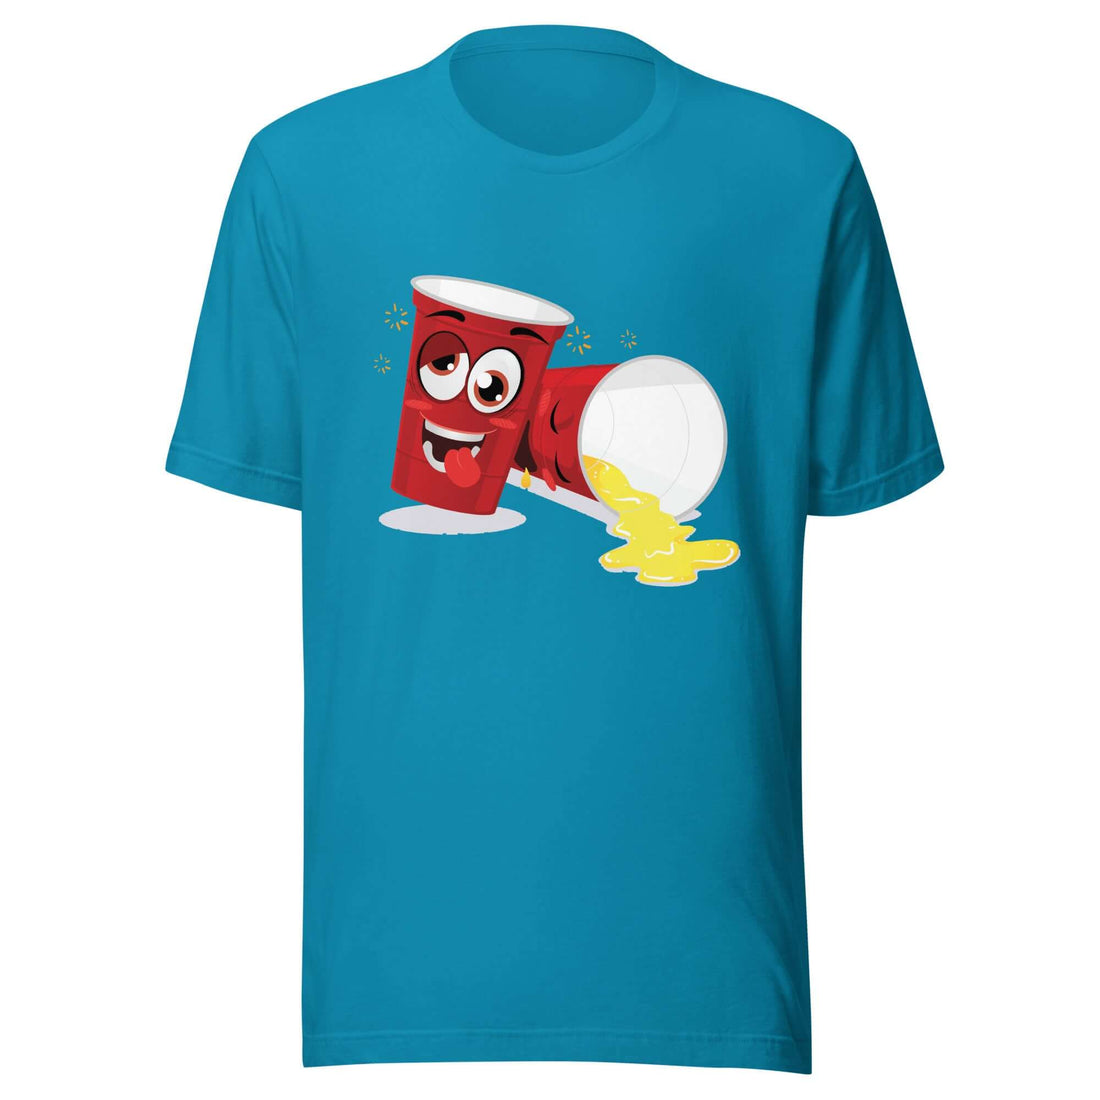 Beer Pong Cups Drunk - Unisex t-shirt - White